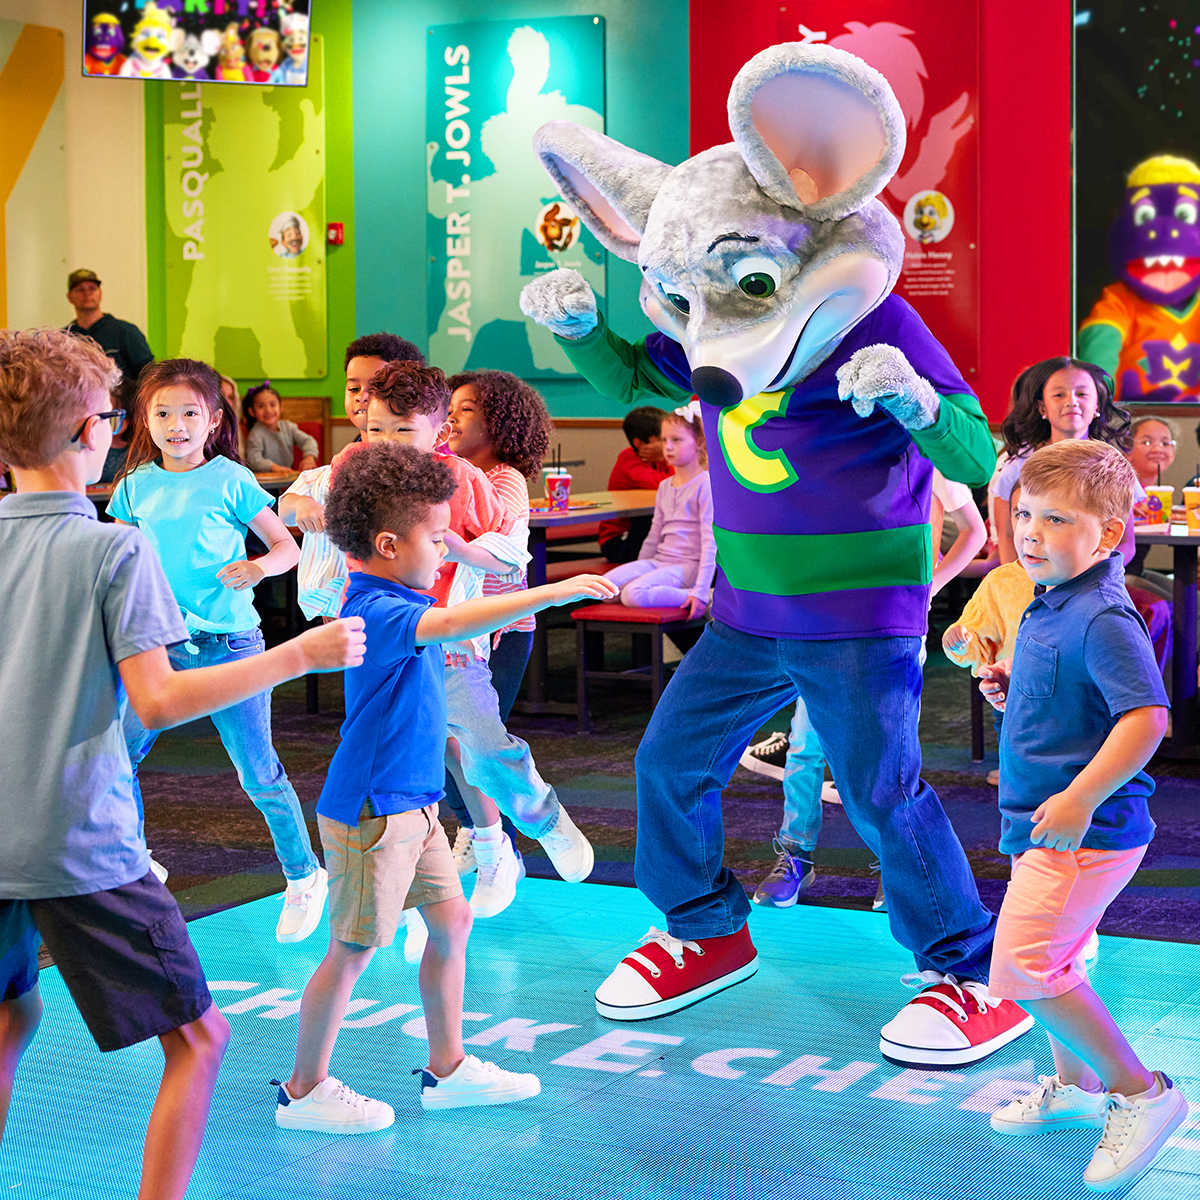 Chuck E. Cheese dances and plays with kids on the new interactive dance floor